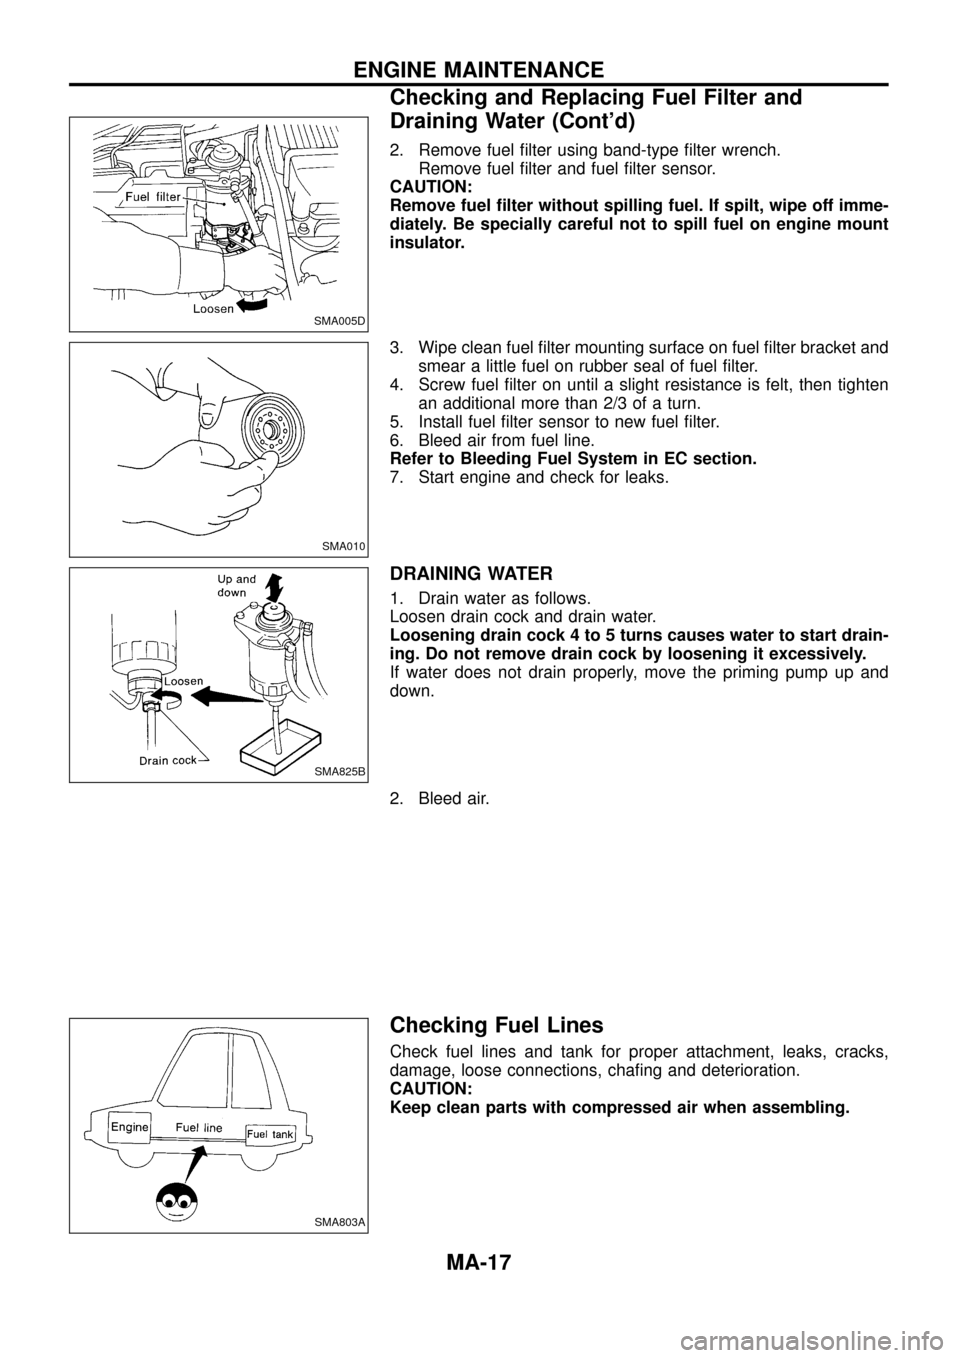 NISSAN PATROL 1998 Y61 / 5.G Maintenance Workshop Manual 2. Remove fuel ®lter using band-type ®lter wrench.
Remove fuel ®lter and fuel ®lter sensor.
CAUTION:
Remove fuel ®lter without spilling fuel. If spilt, wipe off imme-
diately. Be specially carefu